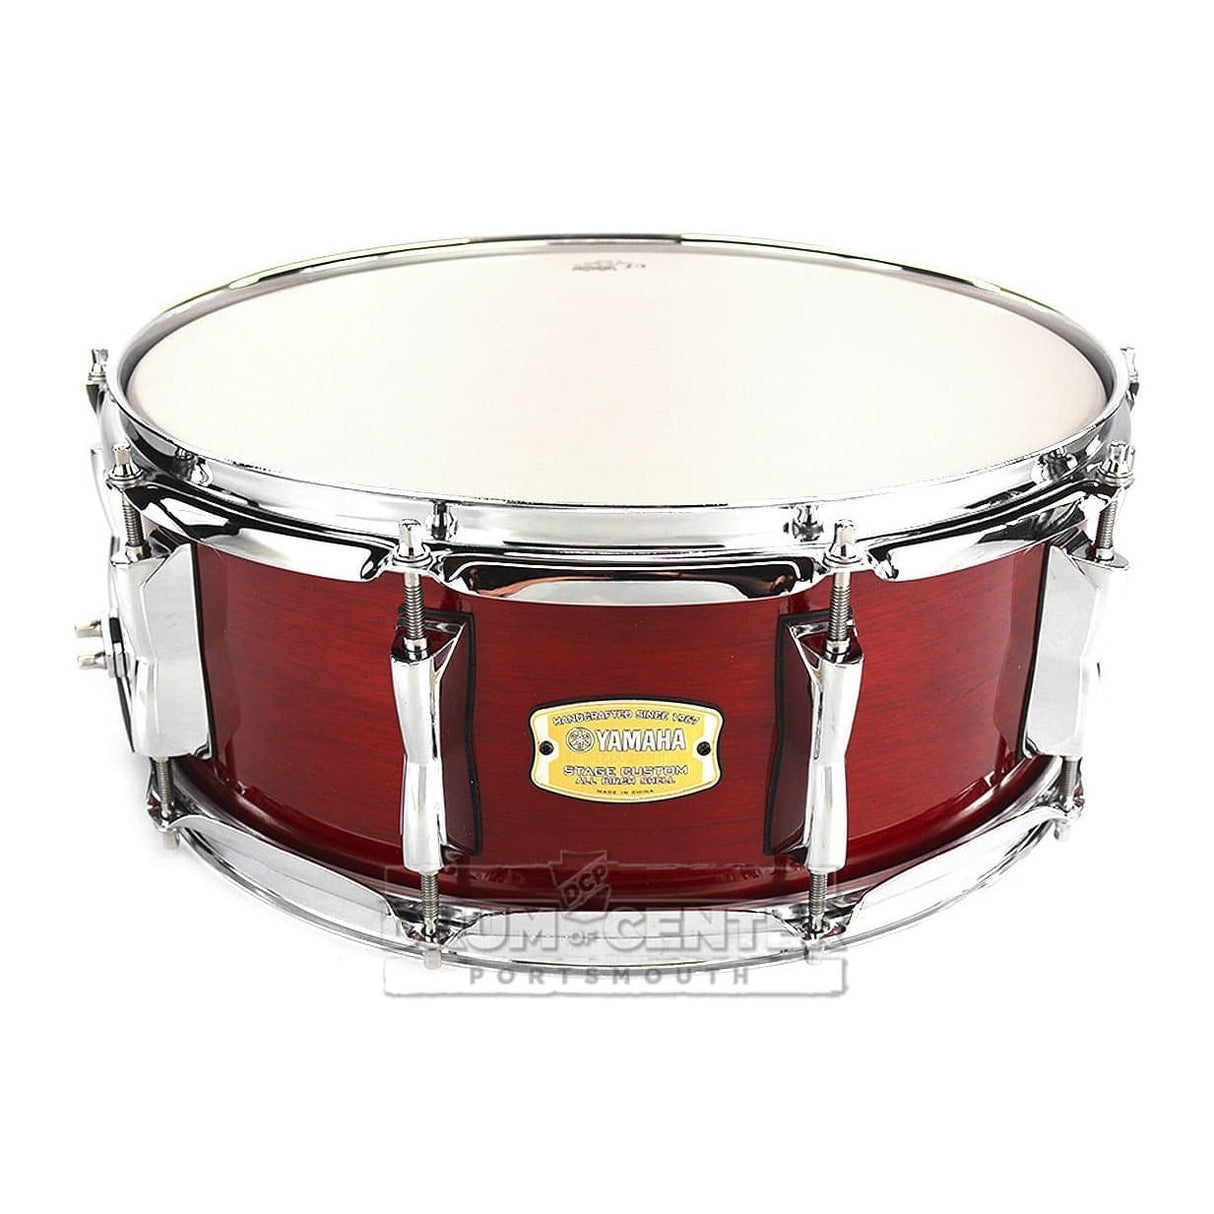 Yamaha Stage Custom Birch Snare Drum 14x5.5 Cranberry Red